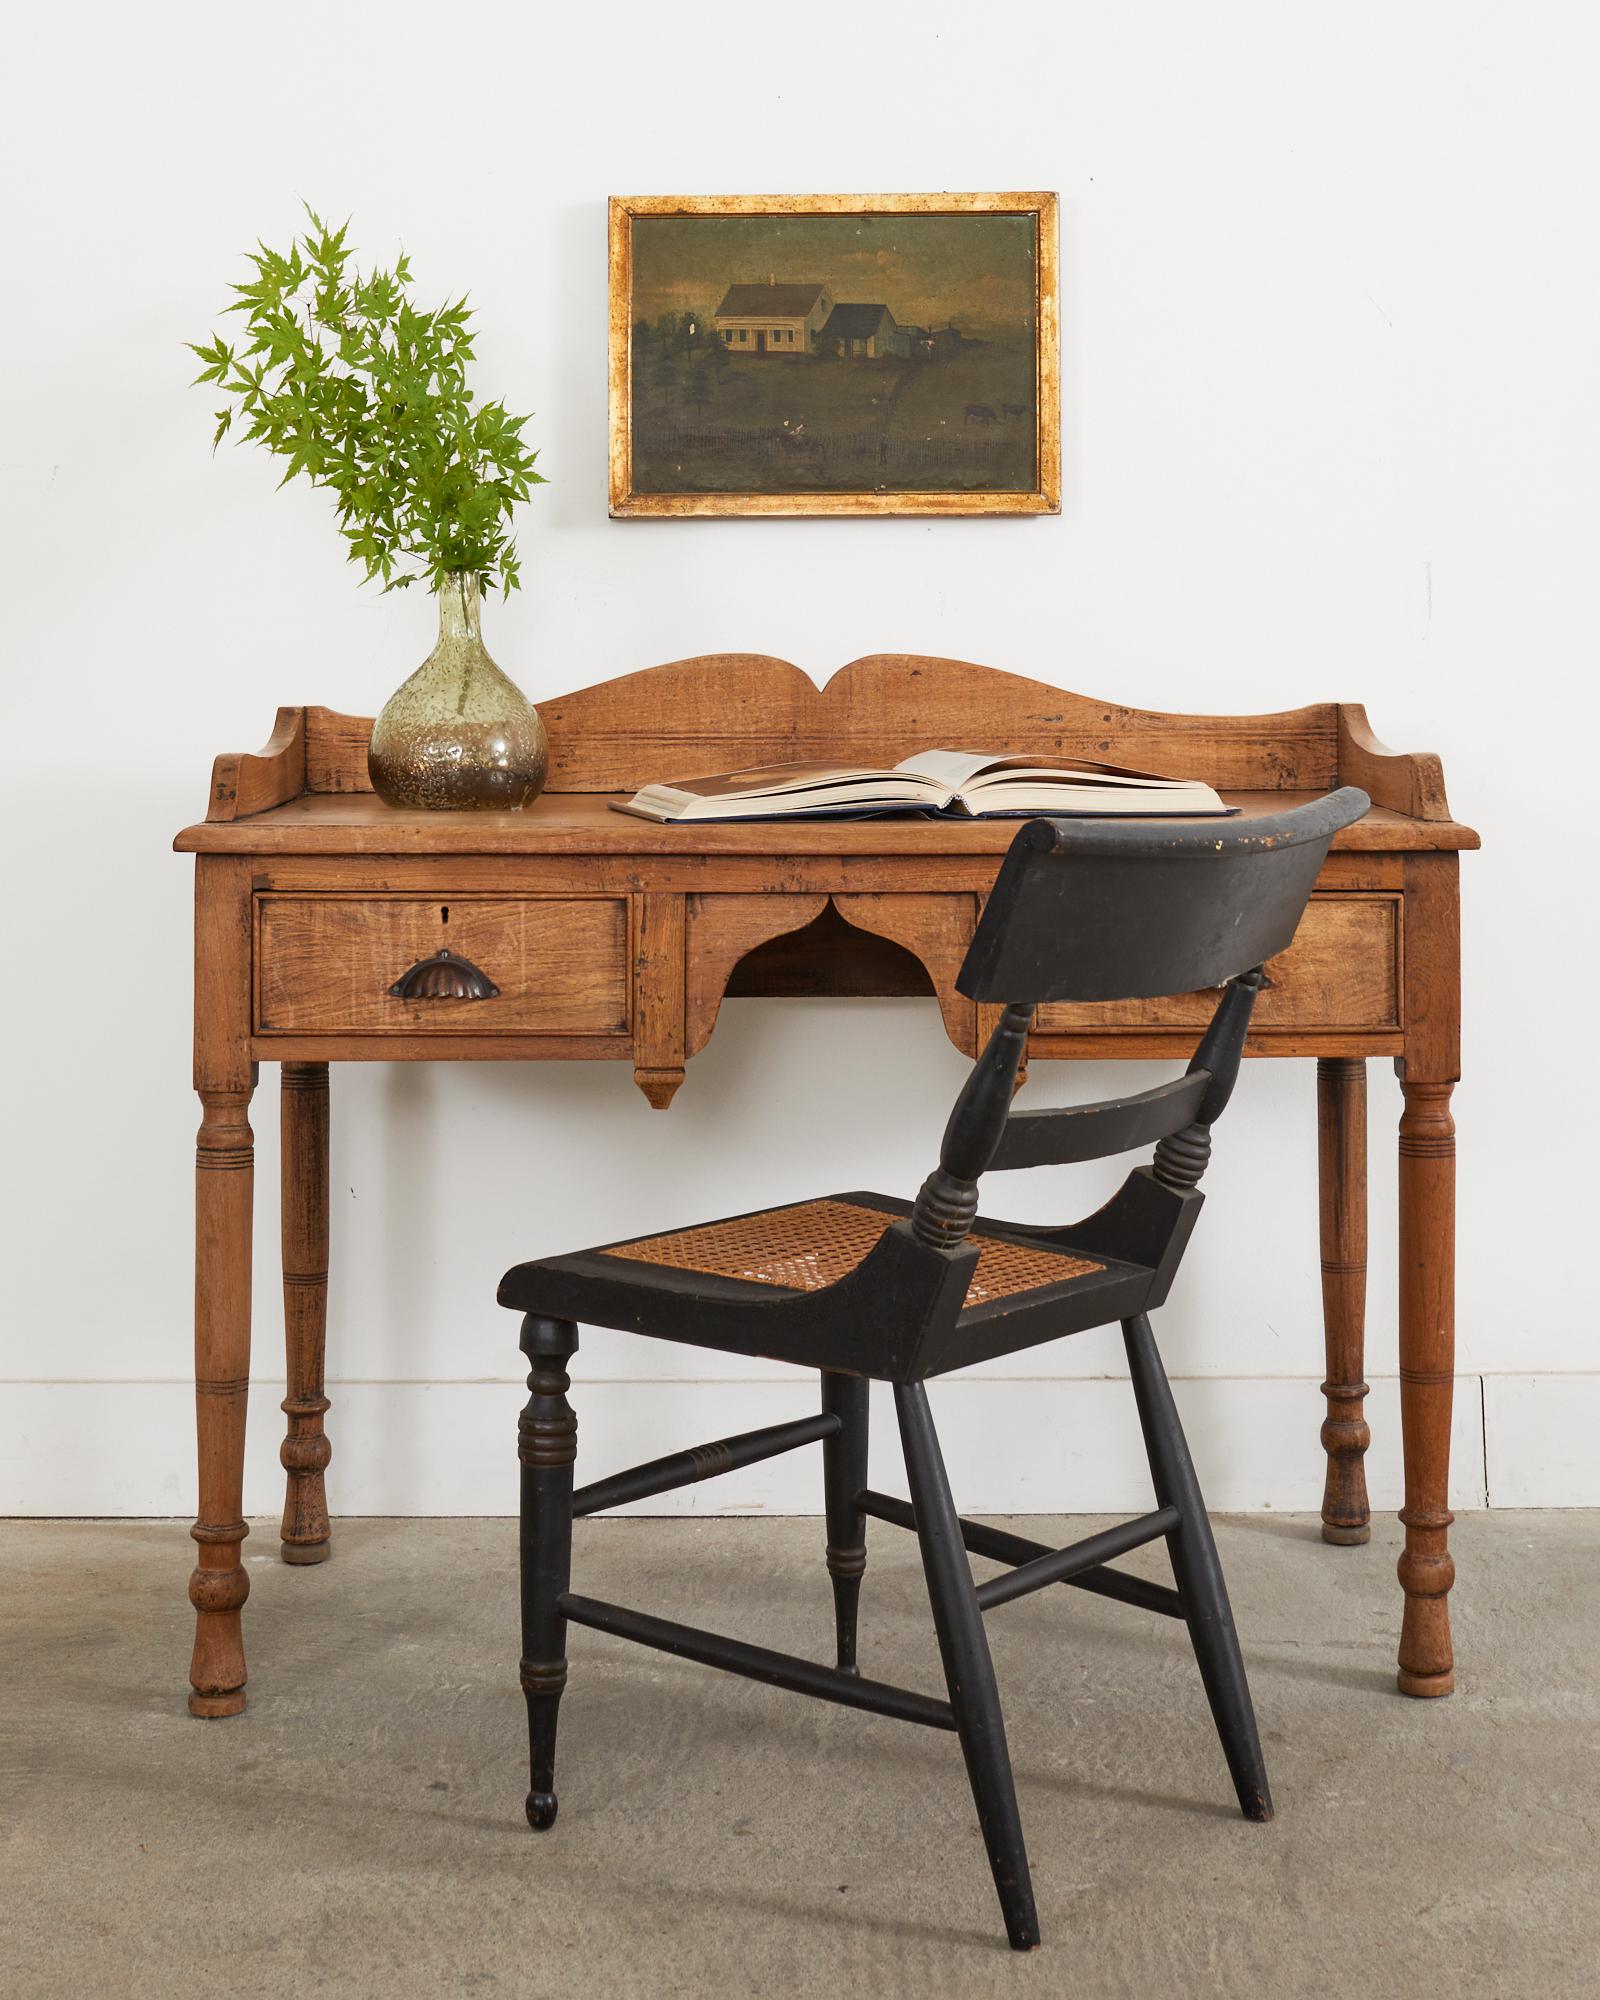 Charming country English provincial oak writing table or desk featuring a bleached or stripped finish. The oak has a lovely aged patina and soft feel with a warm honey tone. The top of the desk measures 30.5 inches high surmounted by a large